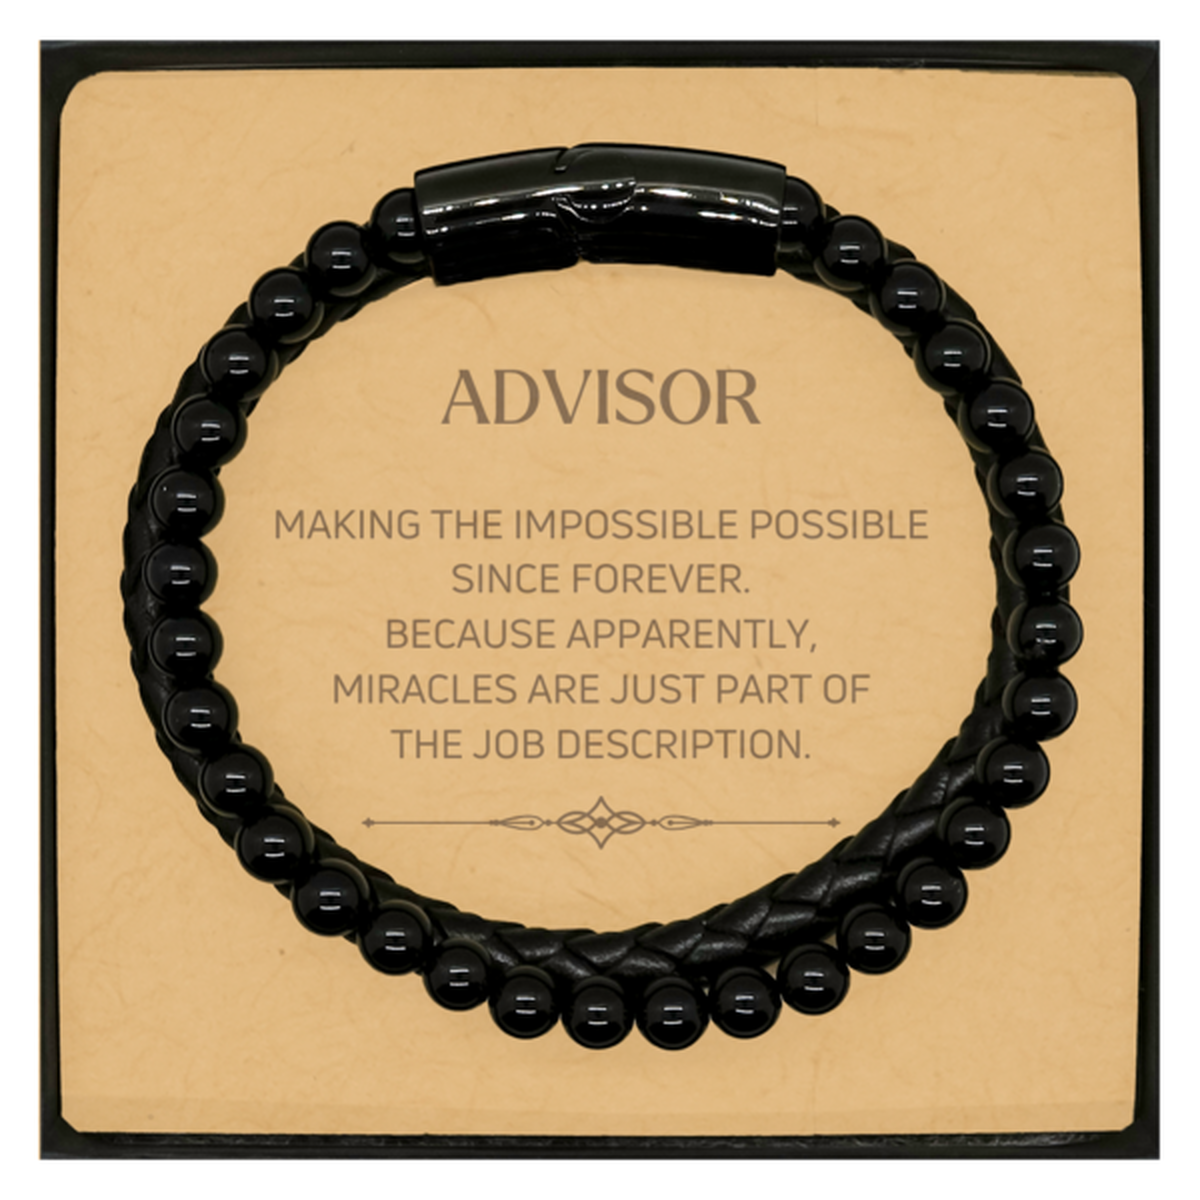 Funny Advisor Gifts, Miracles are just part of the job description, Inspirational Birthday Christmas Stone Leather Bracelets For Advisor, Men, Women, Coworkers, Friends, Boss